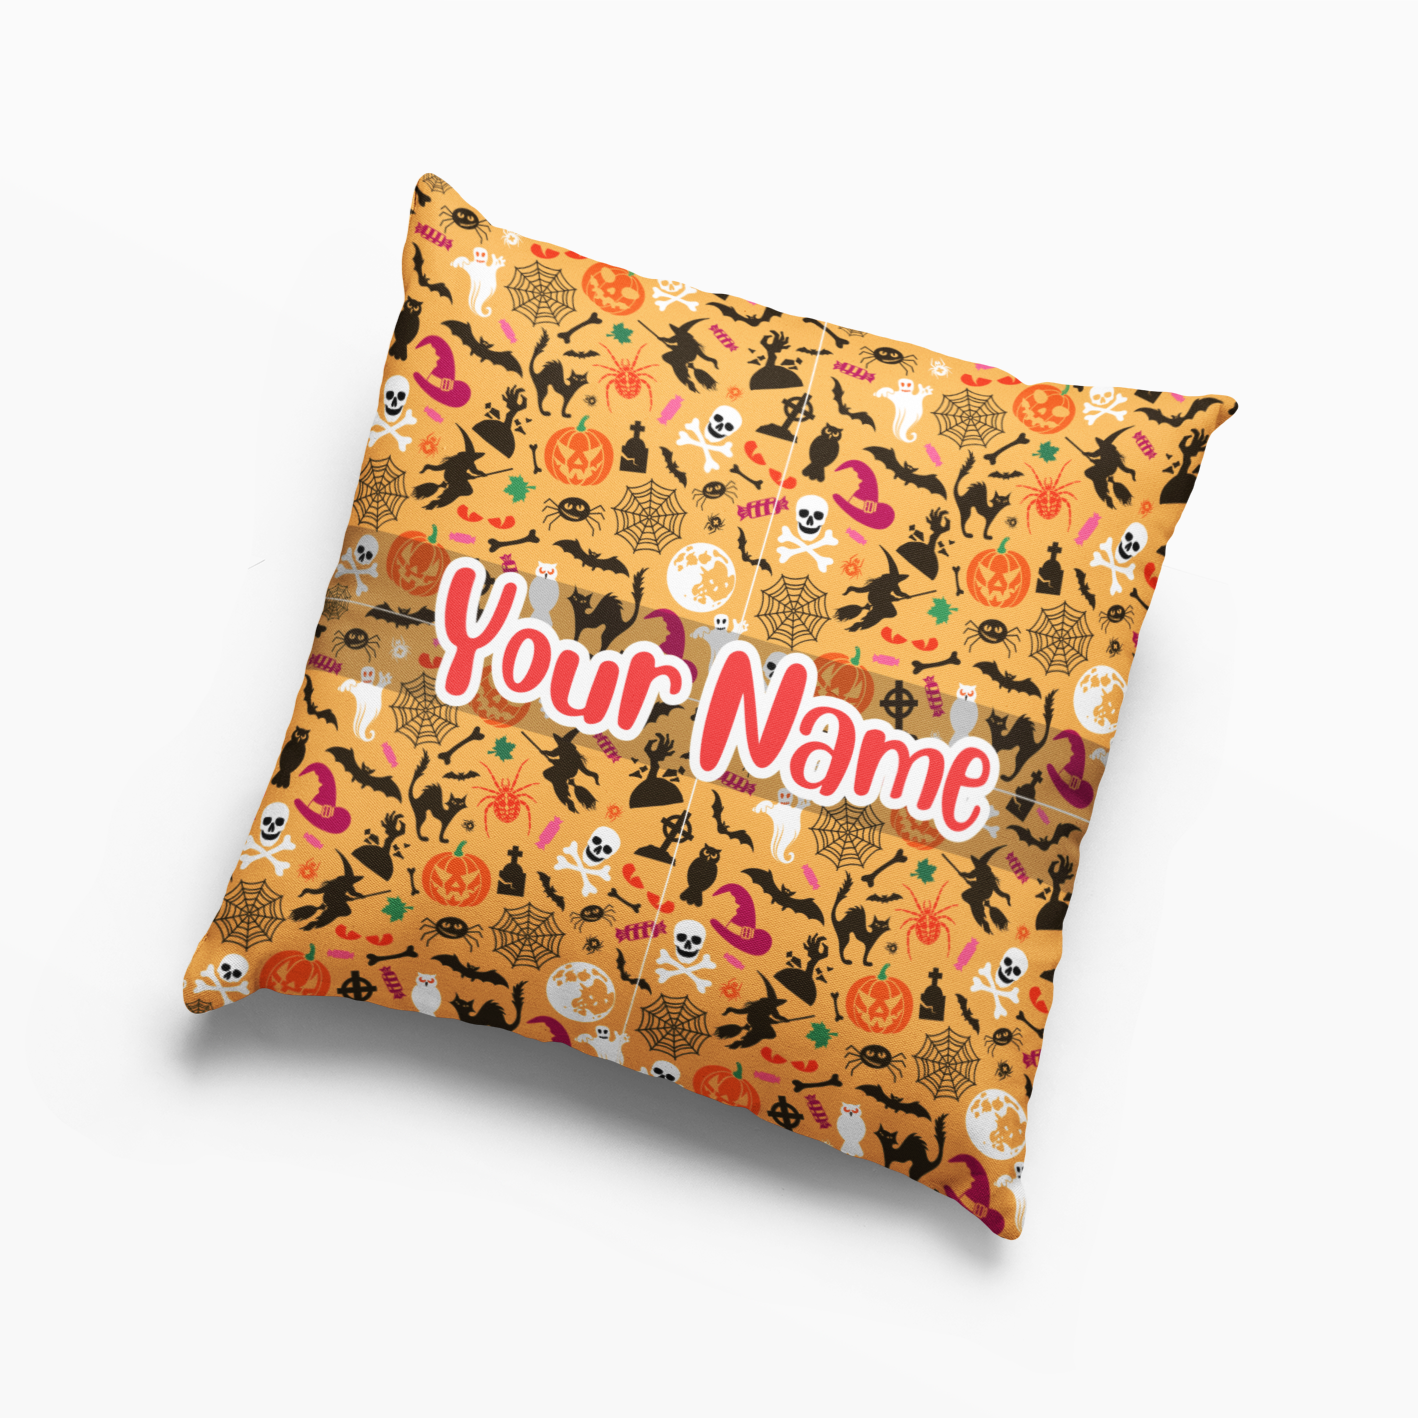 Personalized Halloween Pillow with Your name #9 Pillow Case Halloween Gift for Kids